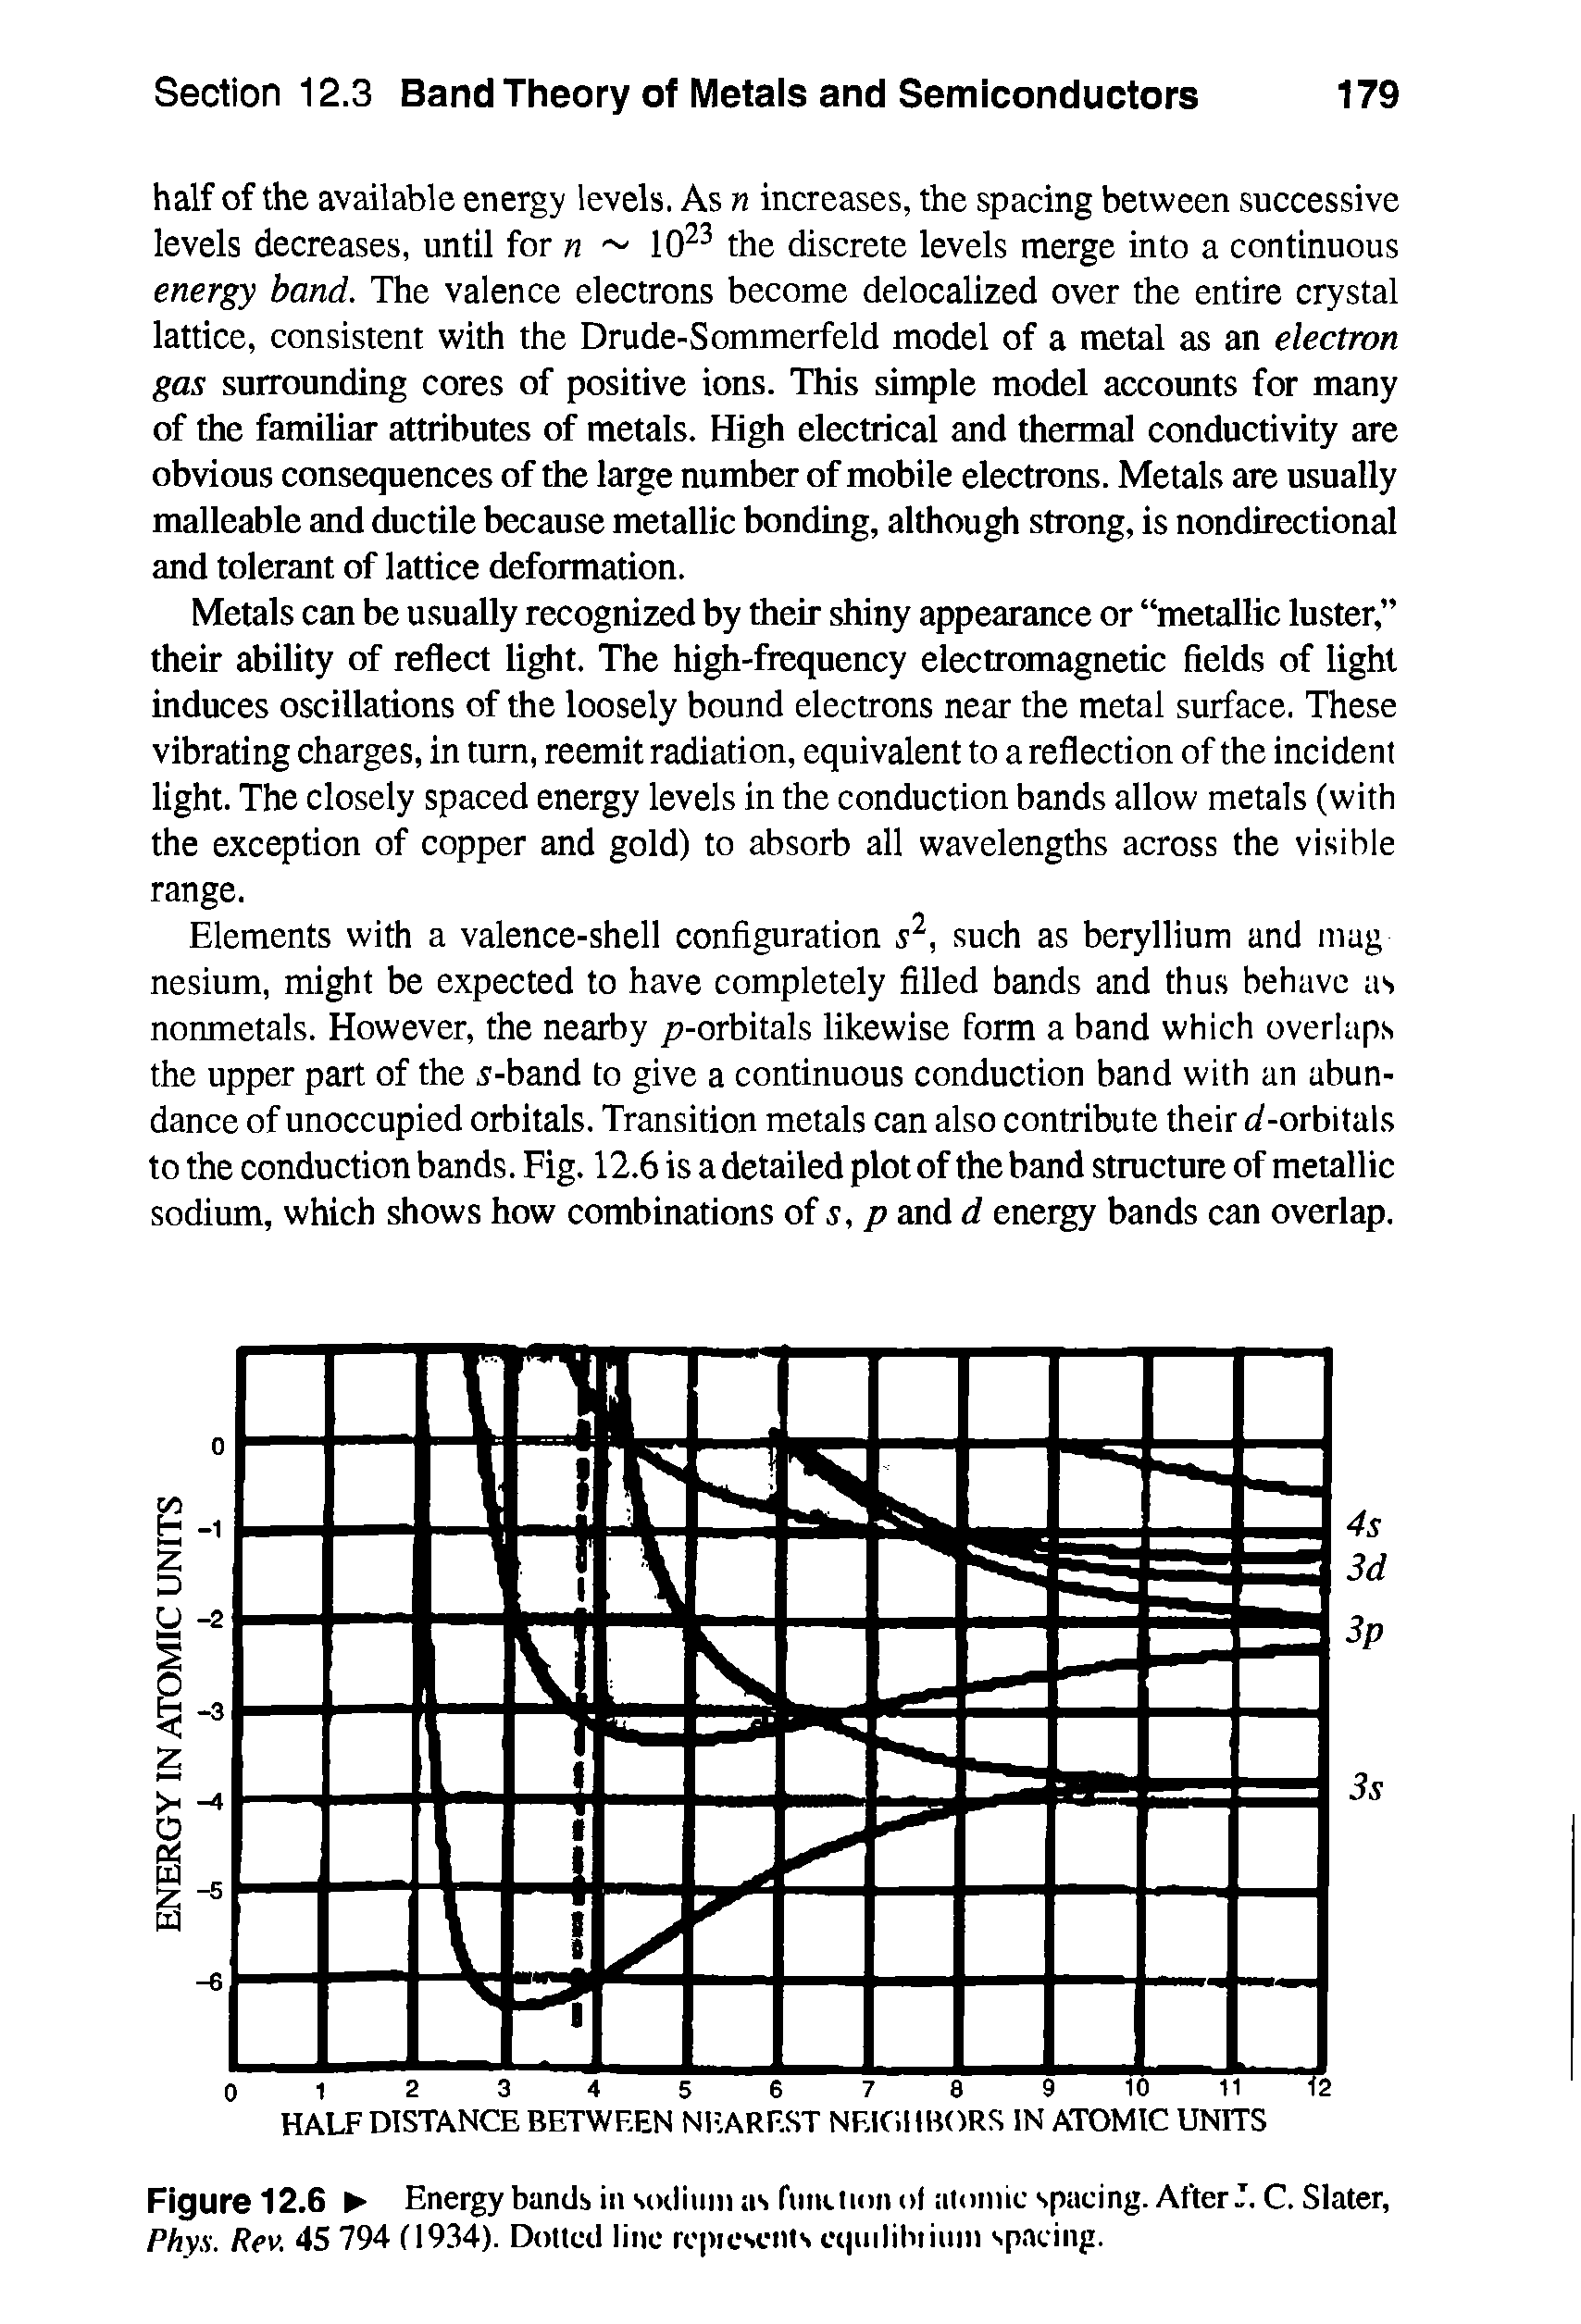 Figure 12.6 Energy bands in sodium as rum.non of atomic spacing. After J. C. Slater, Phys. Rev. 45 794 (1934). Dotted line rcpicscuis cqudibtium sp.tcing.